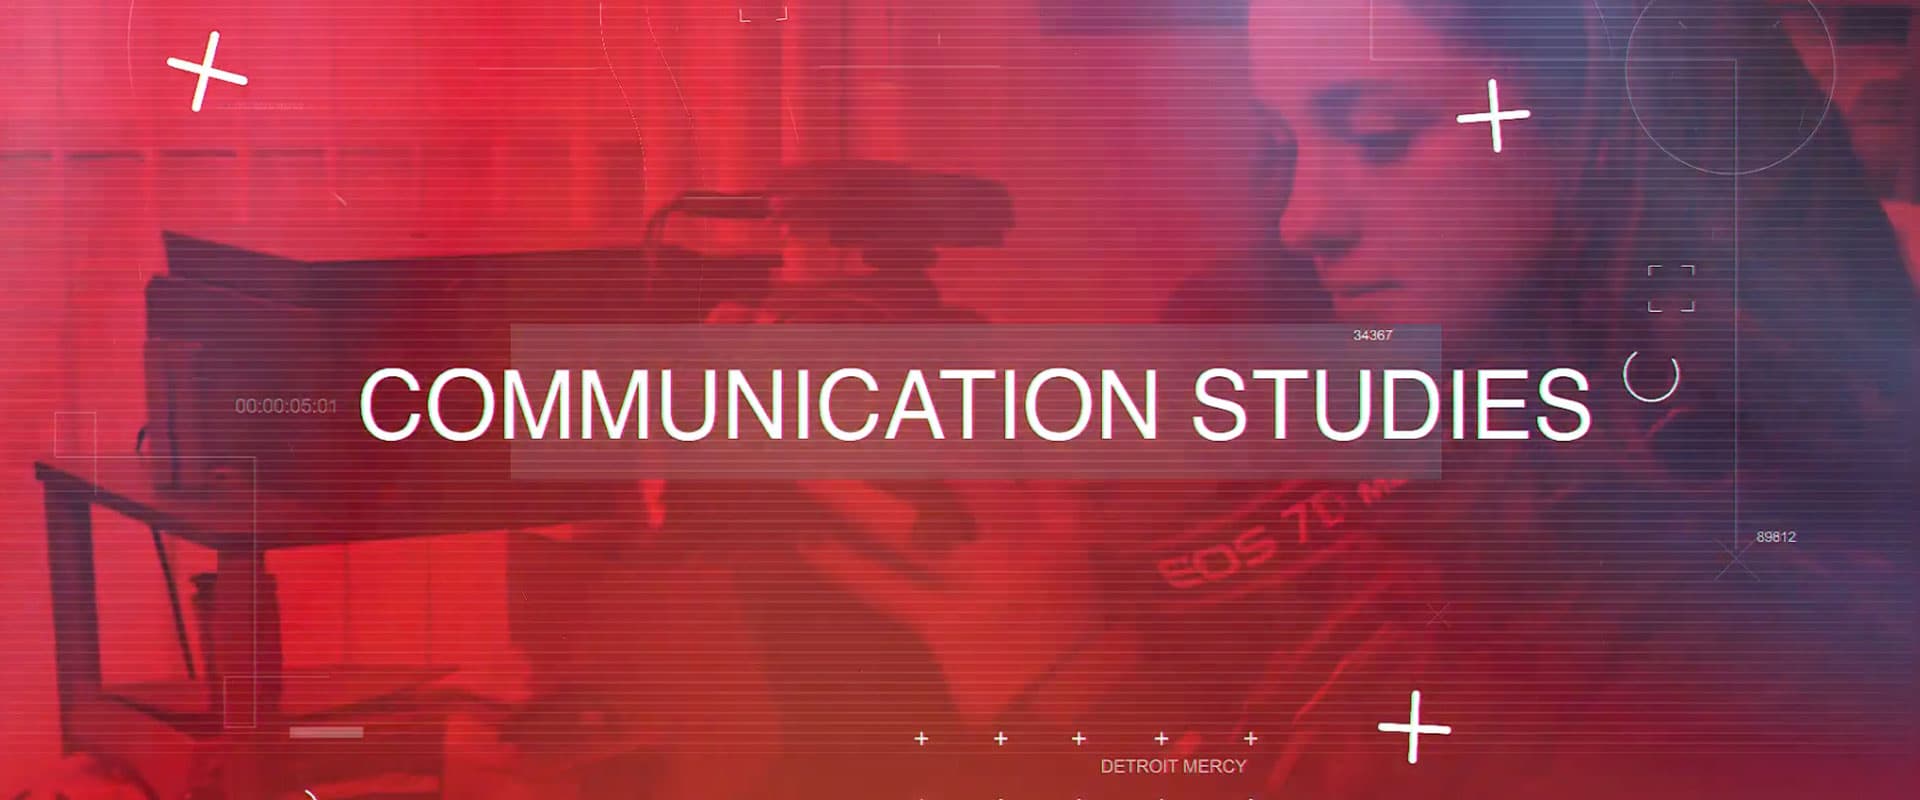 Communication Studies Overview video